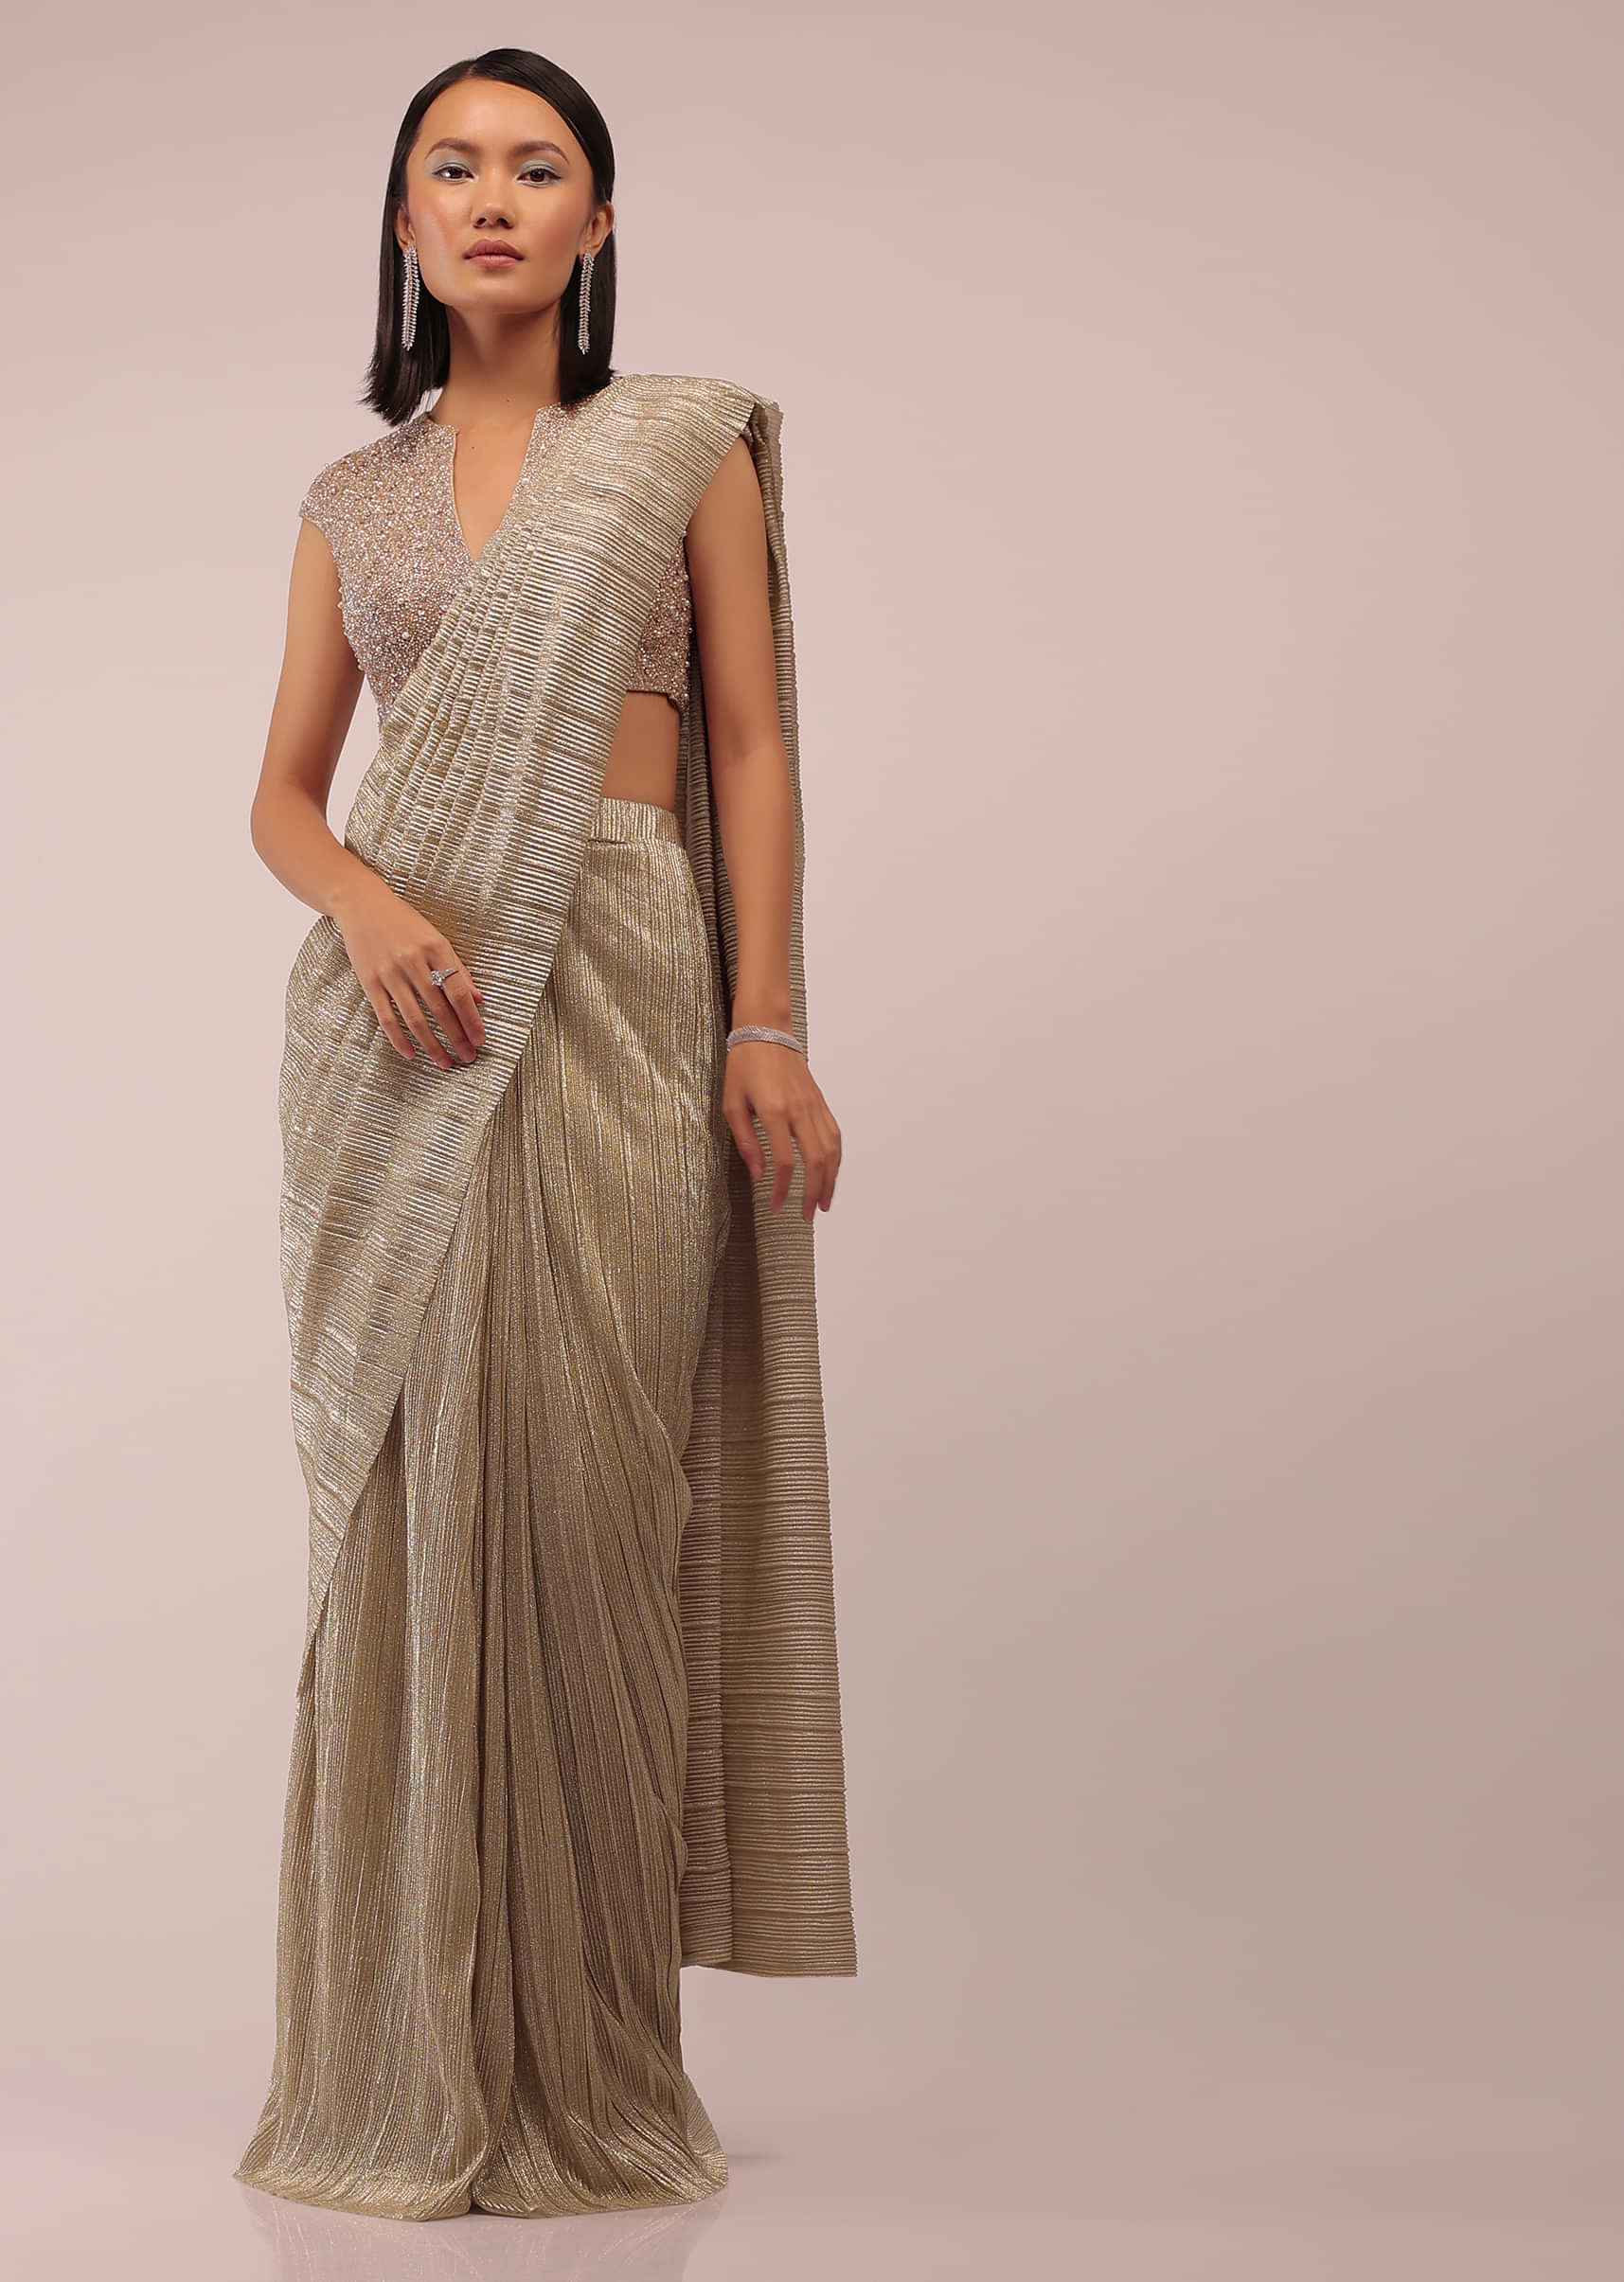 Nomad Shimmer Crush Ready Pleated Saree With A Shimmer Crop Top In 3D Flower, Moti And Cut Dana Embroidery